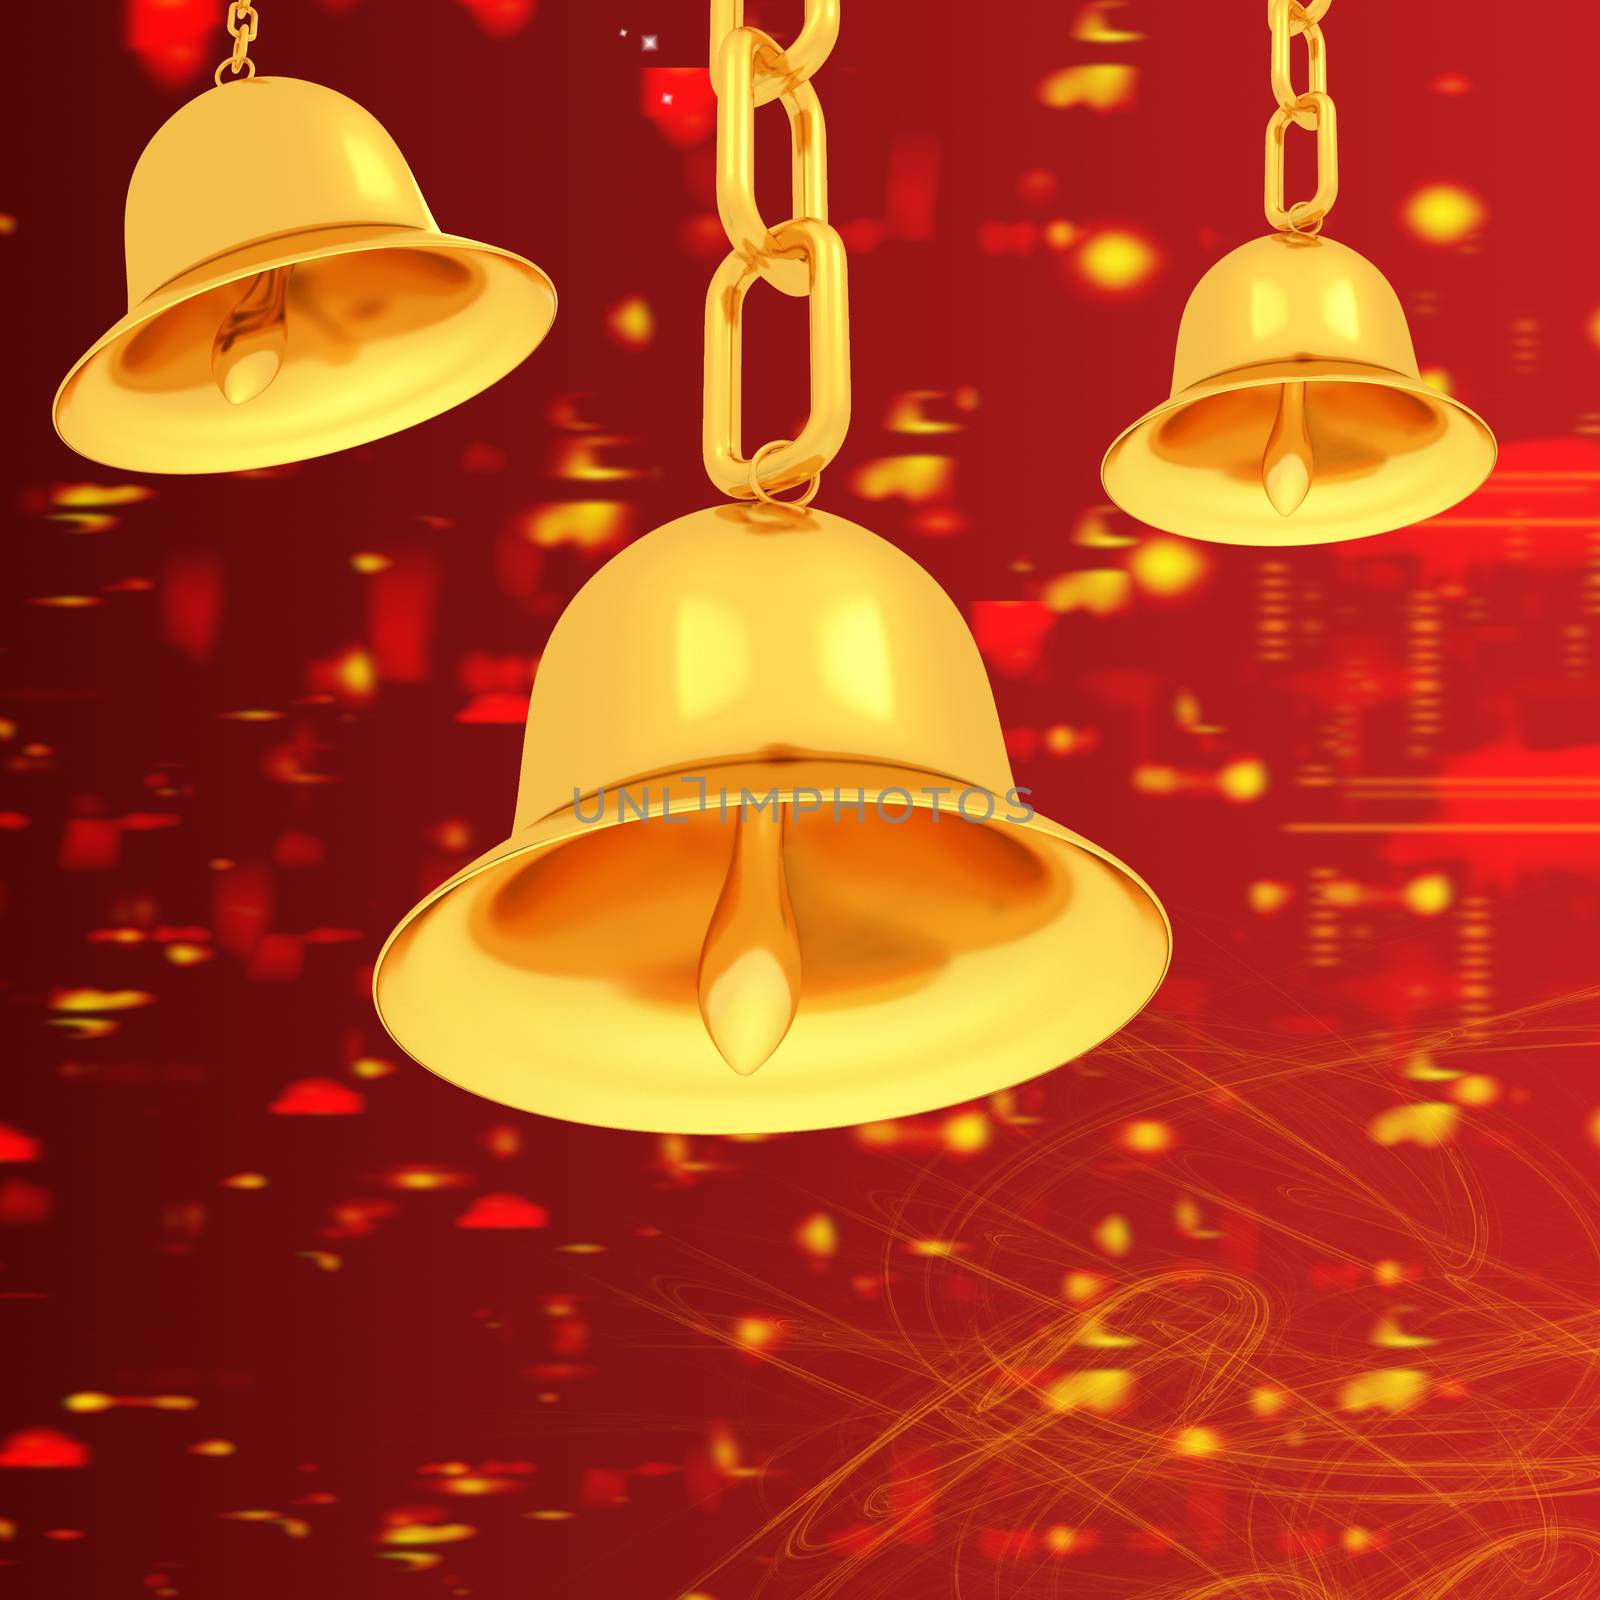 Gold bell on winter or Christmas style background by Guru3D